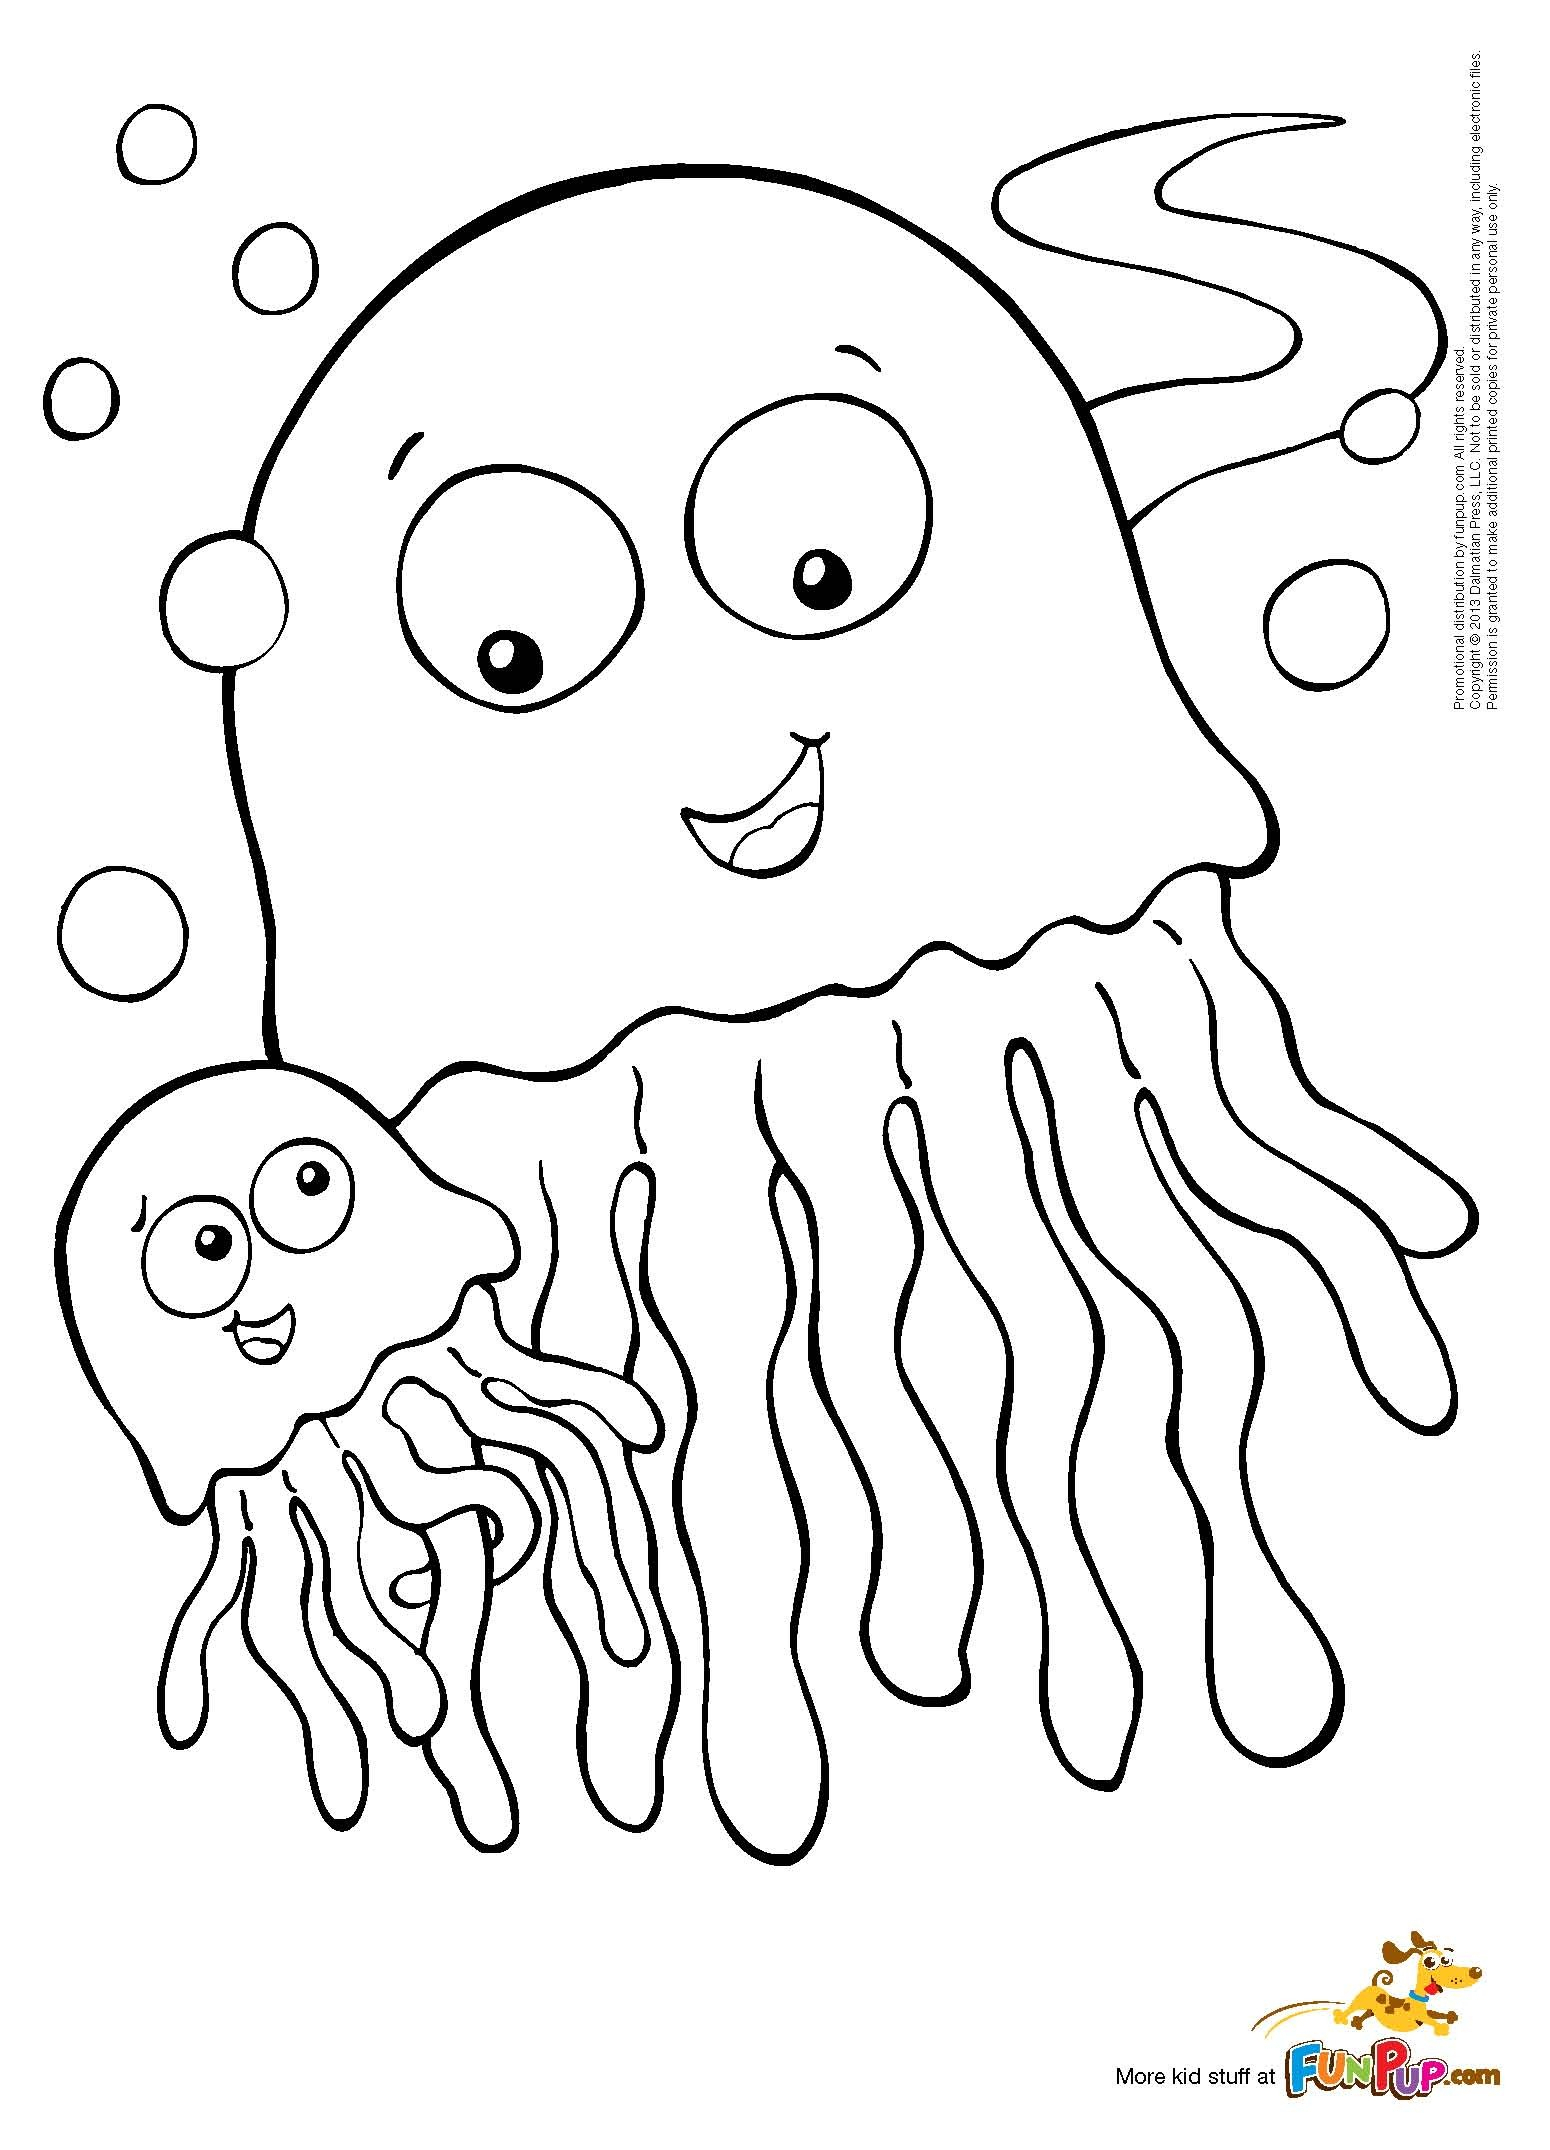 jellyfish coloring pictures jellyfish drawing for kids at paintingvalleycom explore jellyfish coloring pictures 